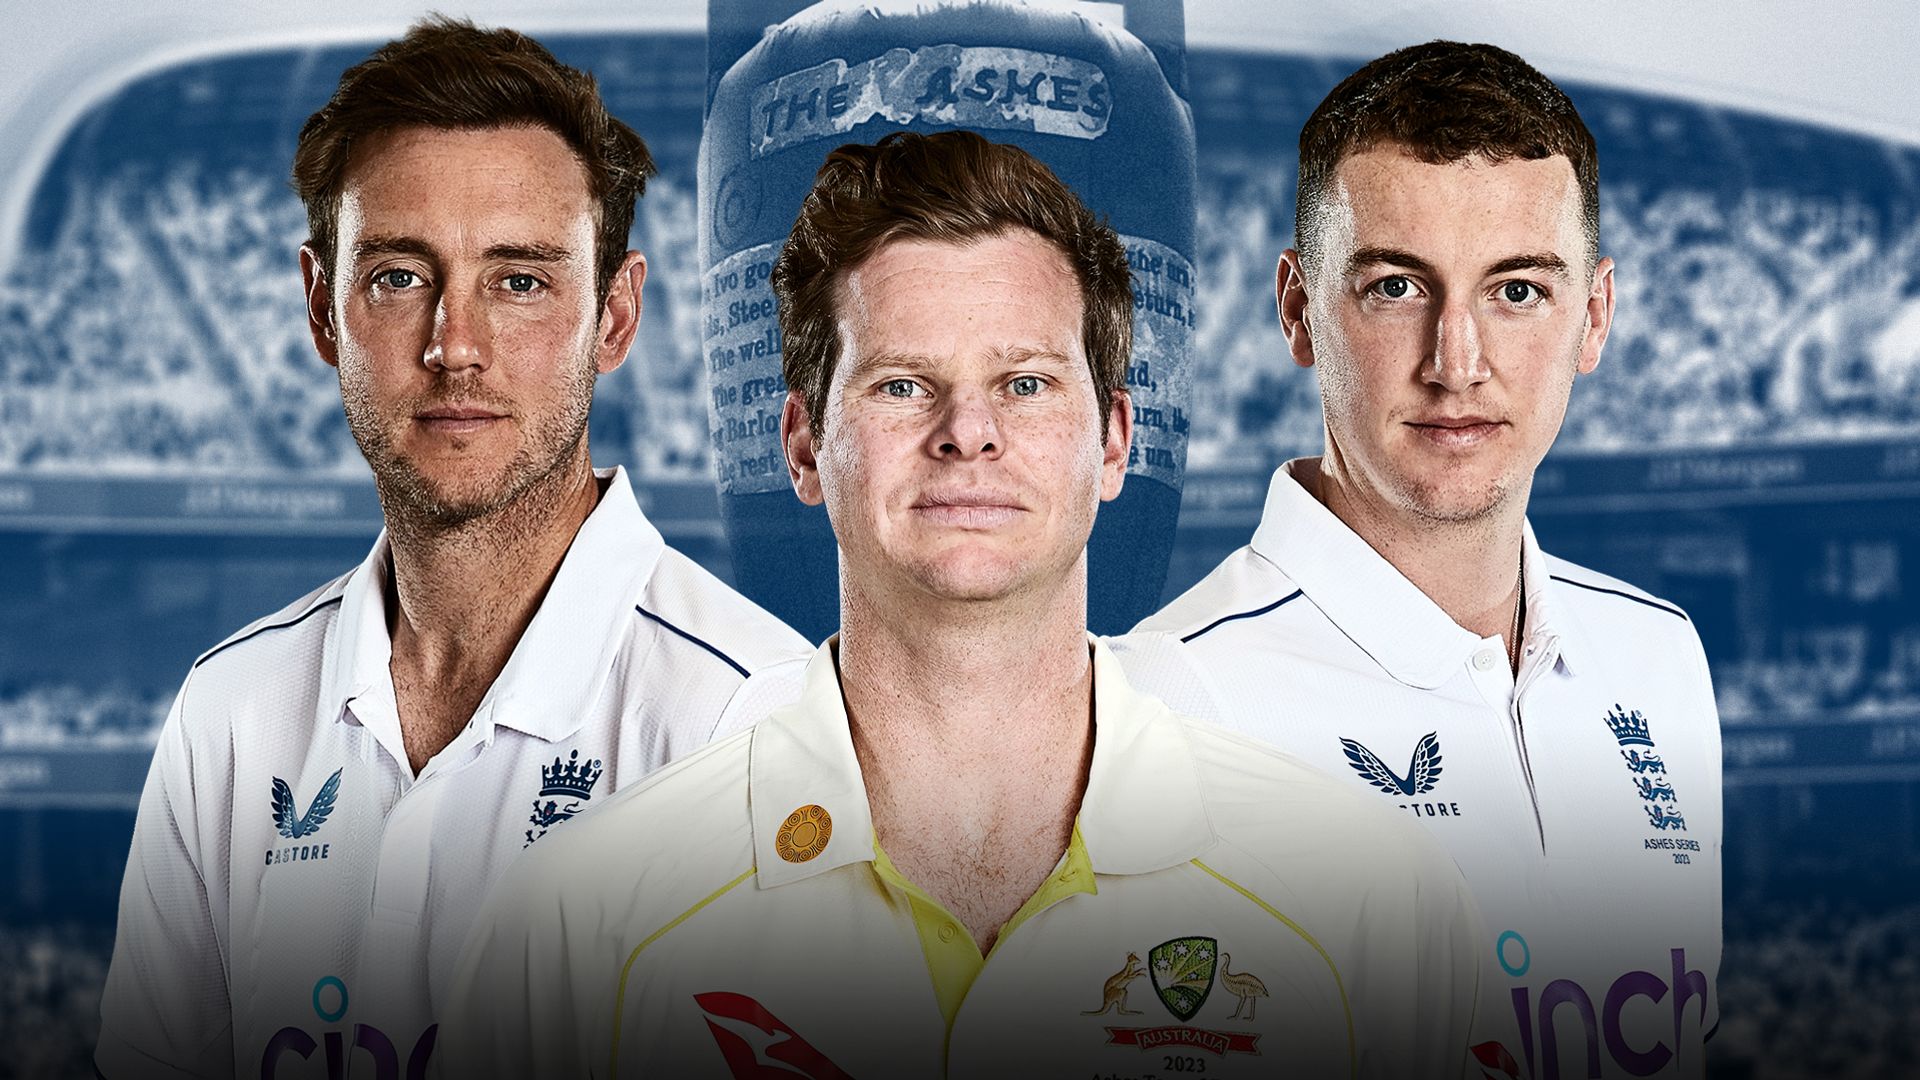 Ashes combined XI: Smith to open? Does Broad make the cut?